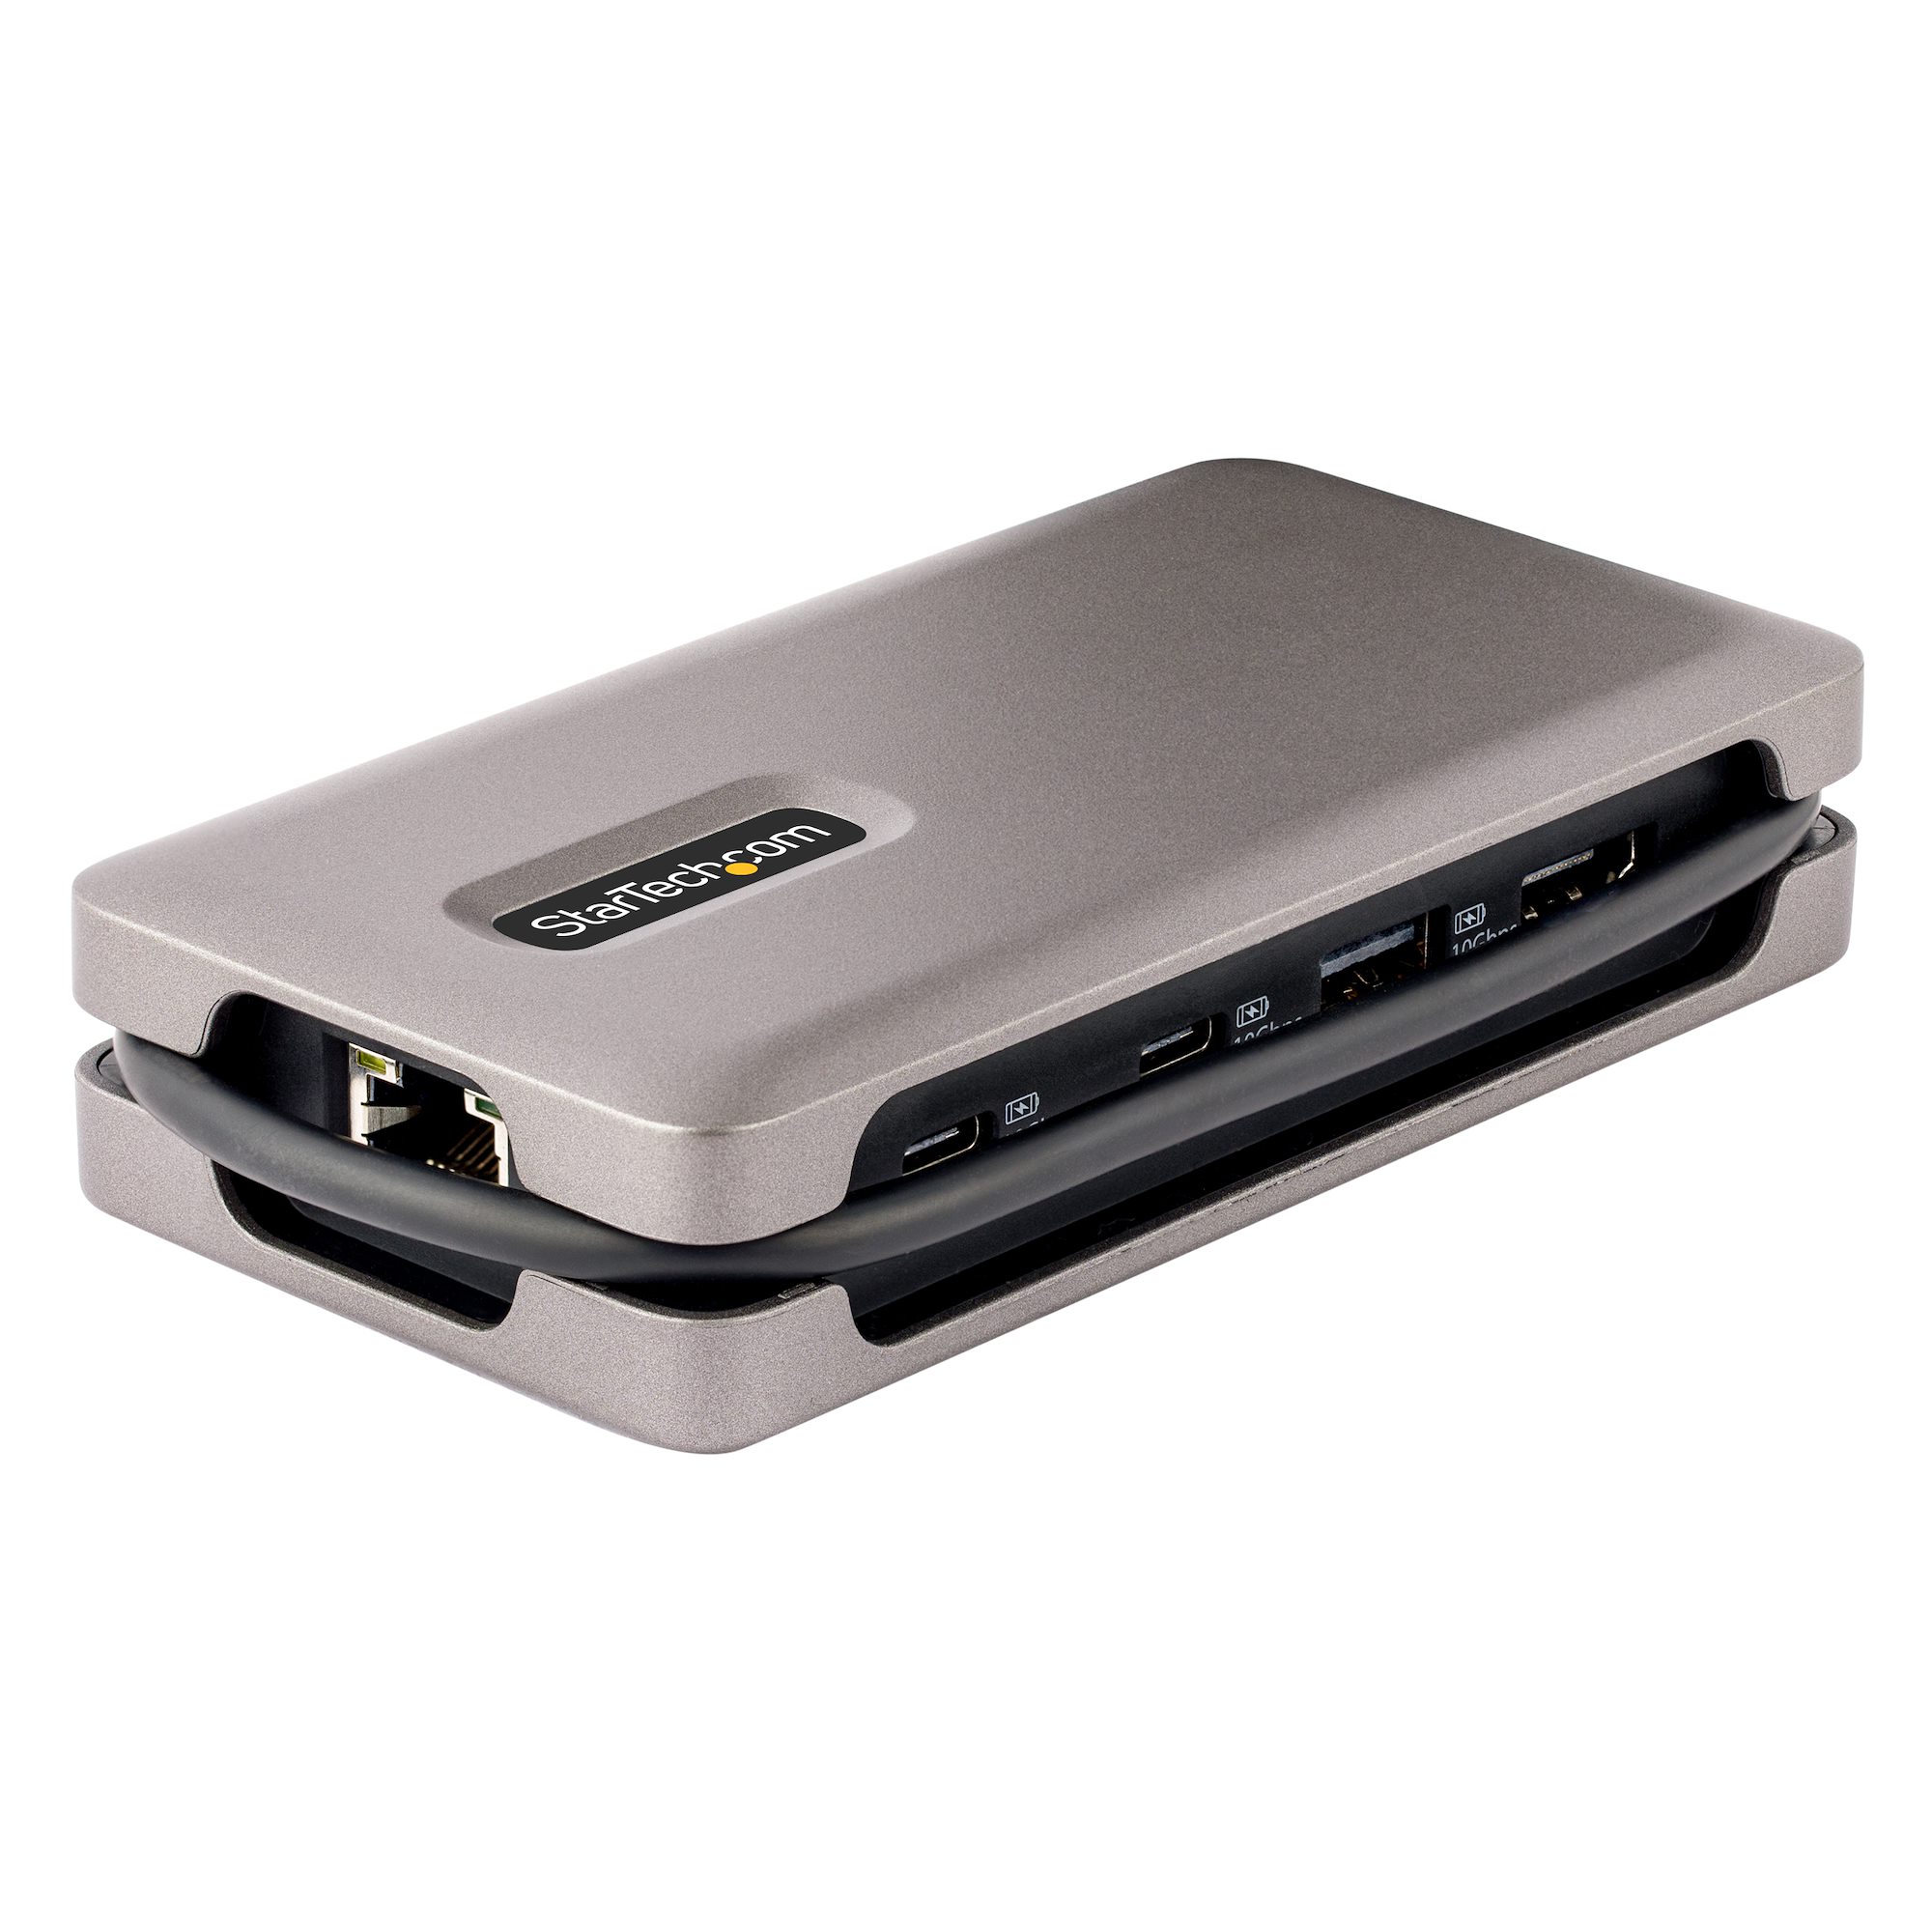 StarTech.com USB C Multiport Adapter with HDMI, VGA, Gb